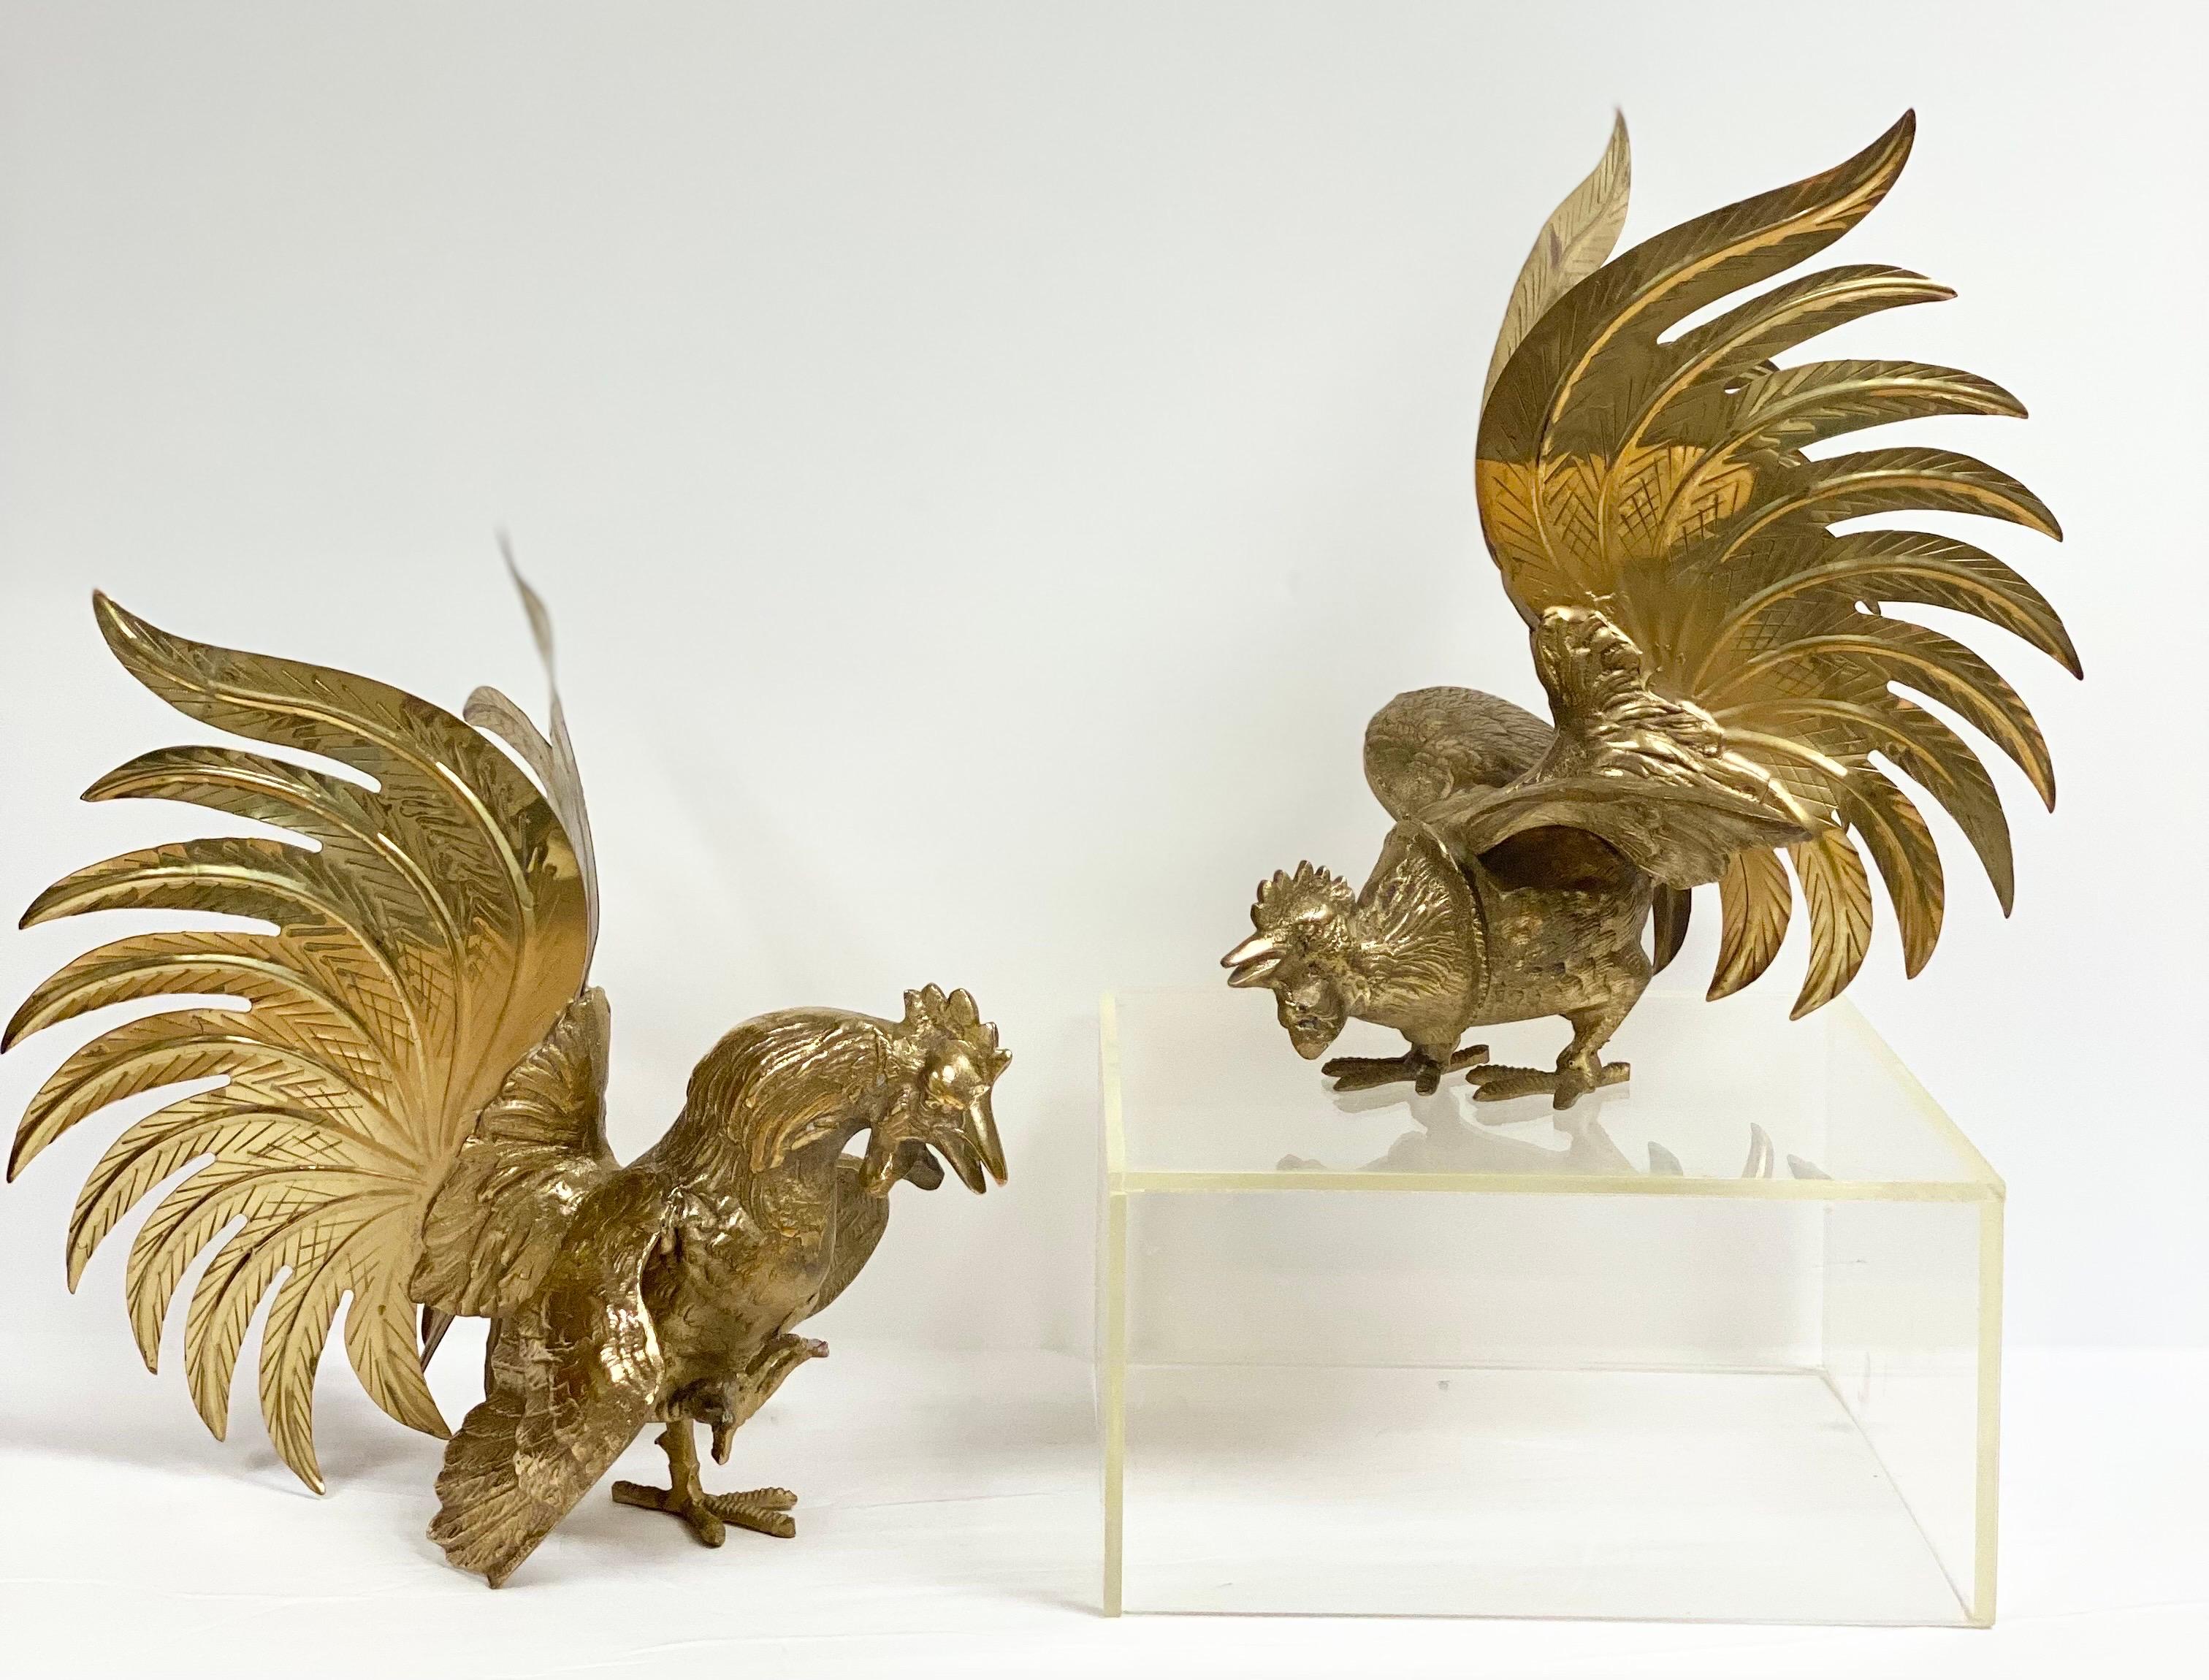 We are very pleased to offer a stunning pair of vintage figurine roosters, circa the 1960s. Each statue is handmade from a high-quality brass material and sculpted with lifelike details. This pair is an eclectic set that will surely add height and